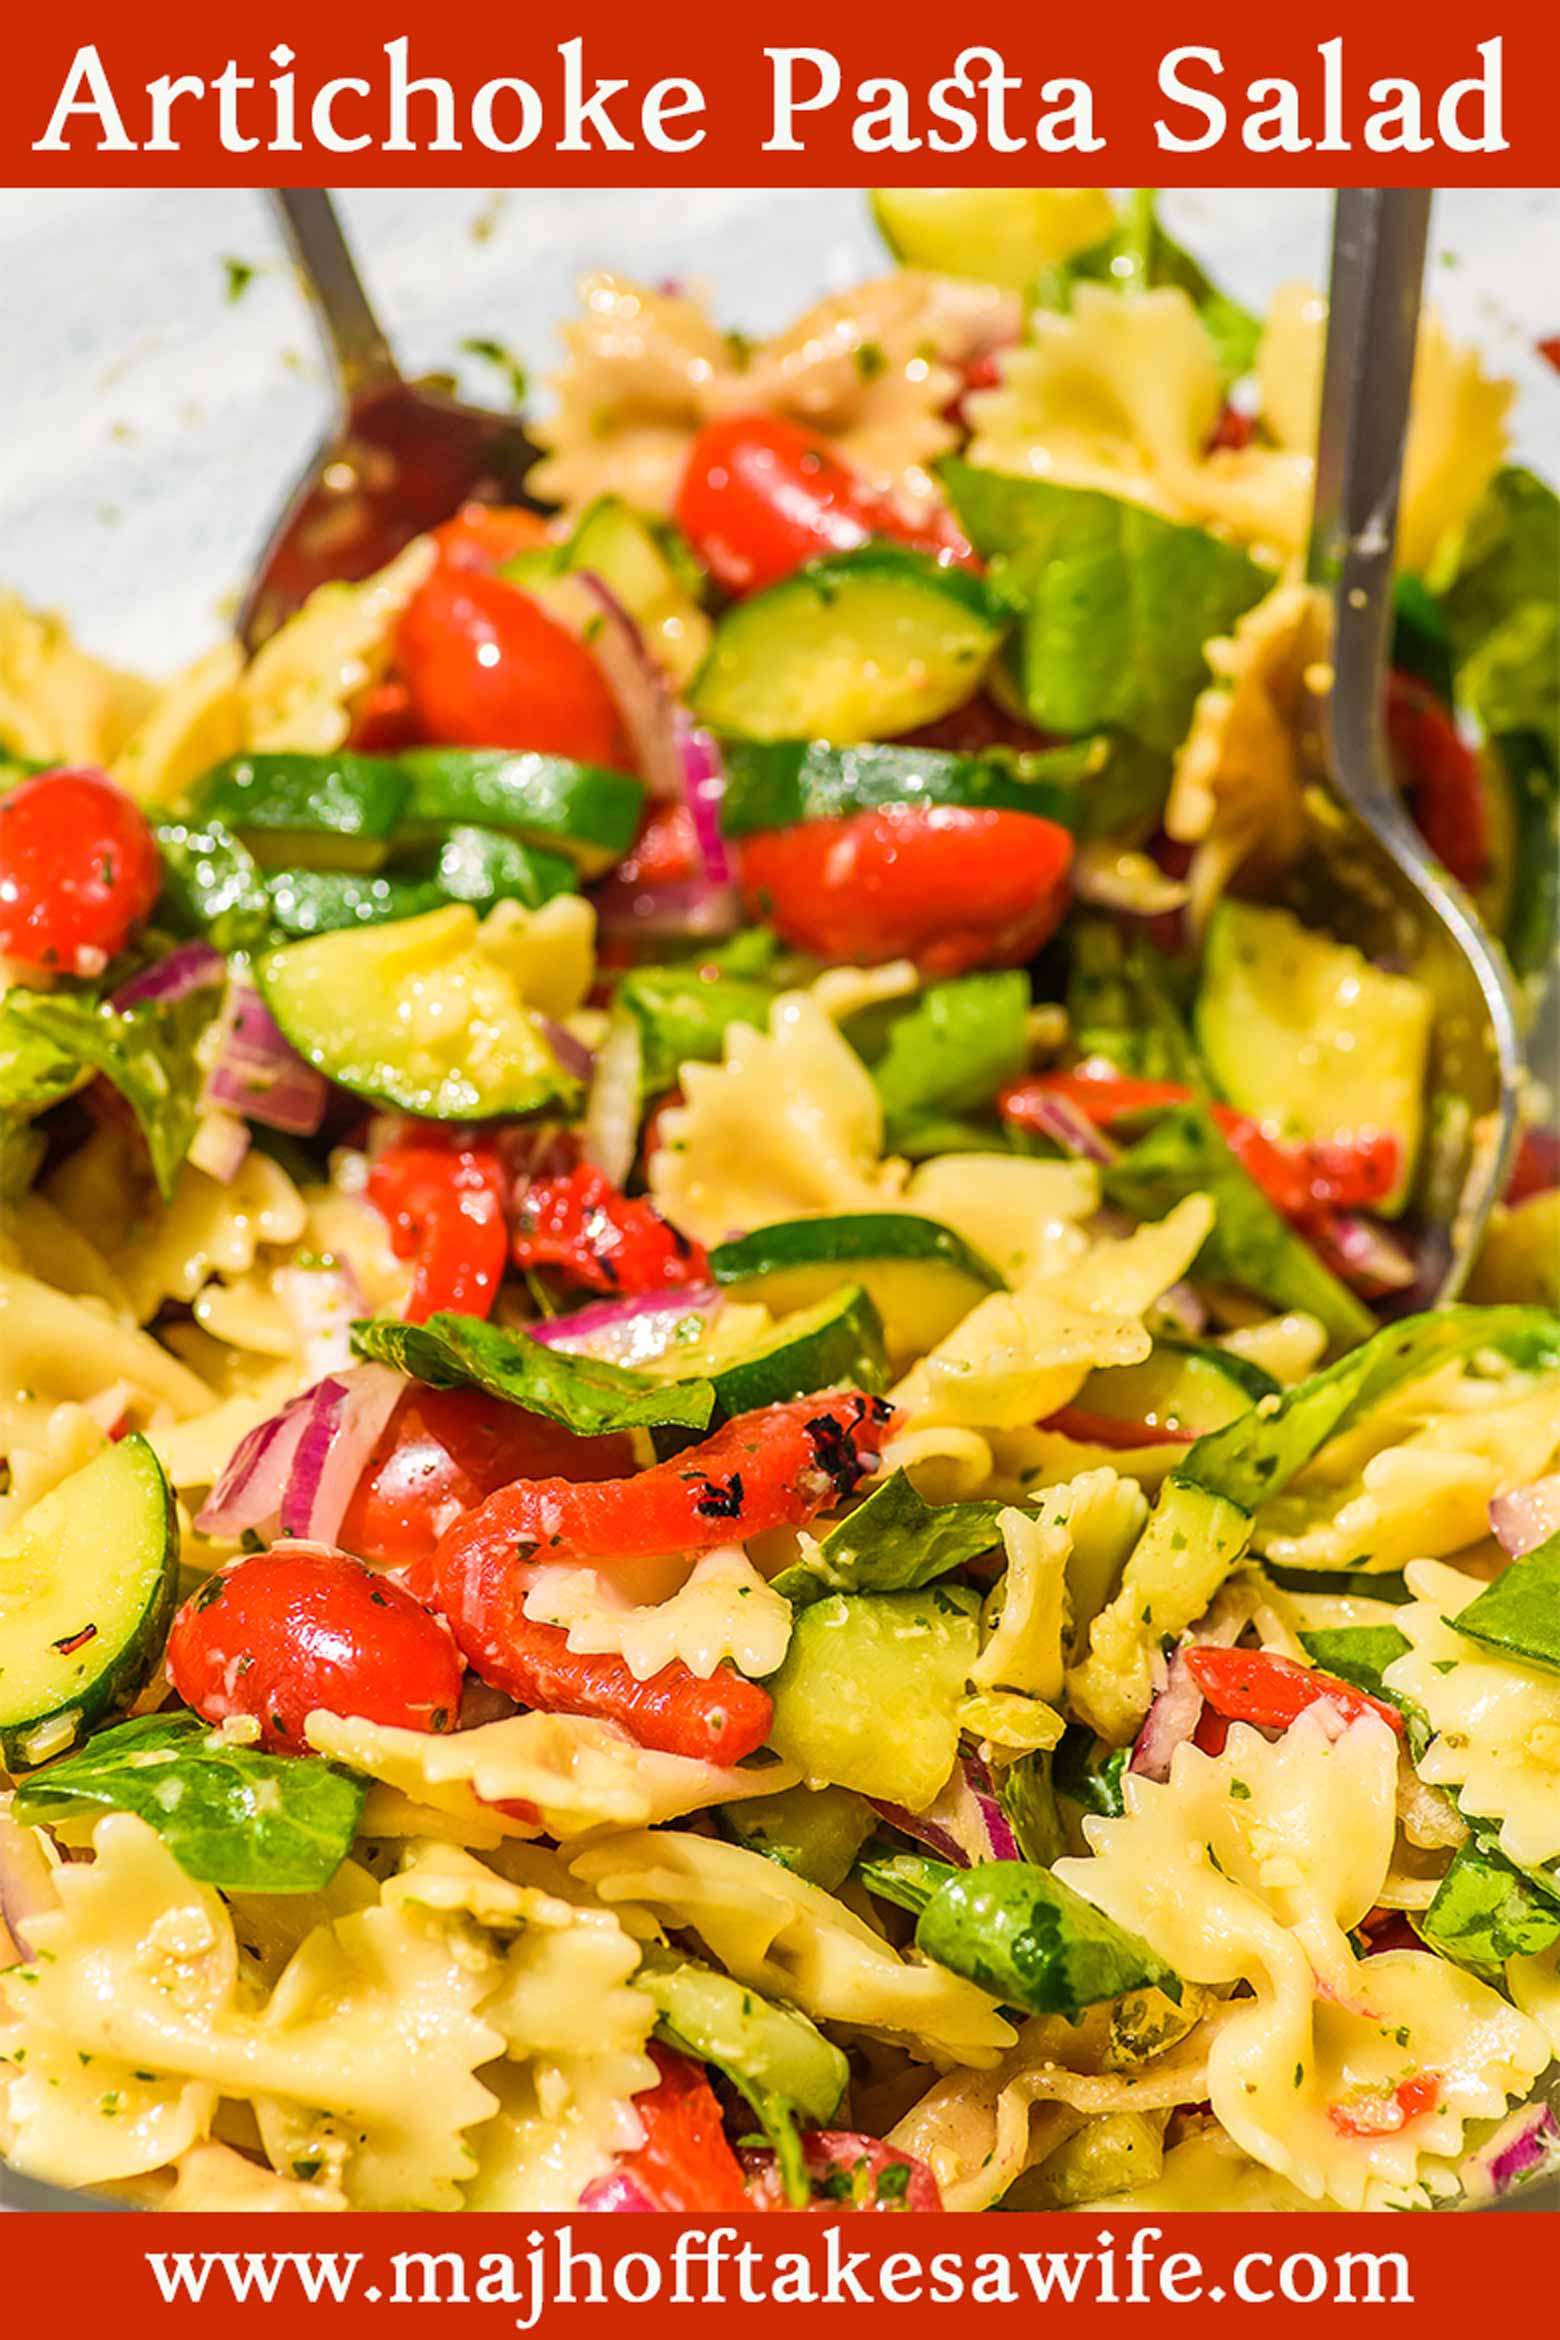 Homemade Pasta Salad with Artichokes and Summer Vegetables